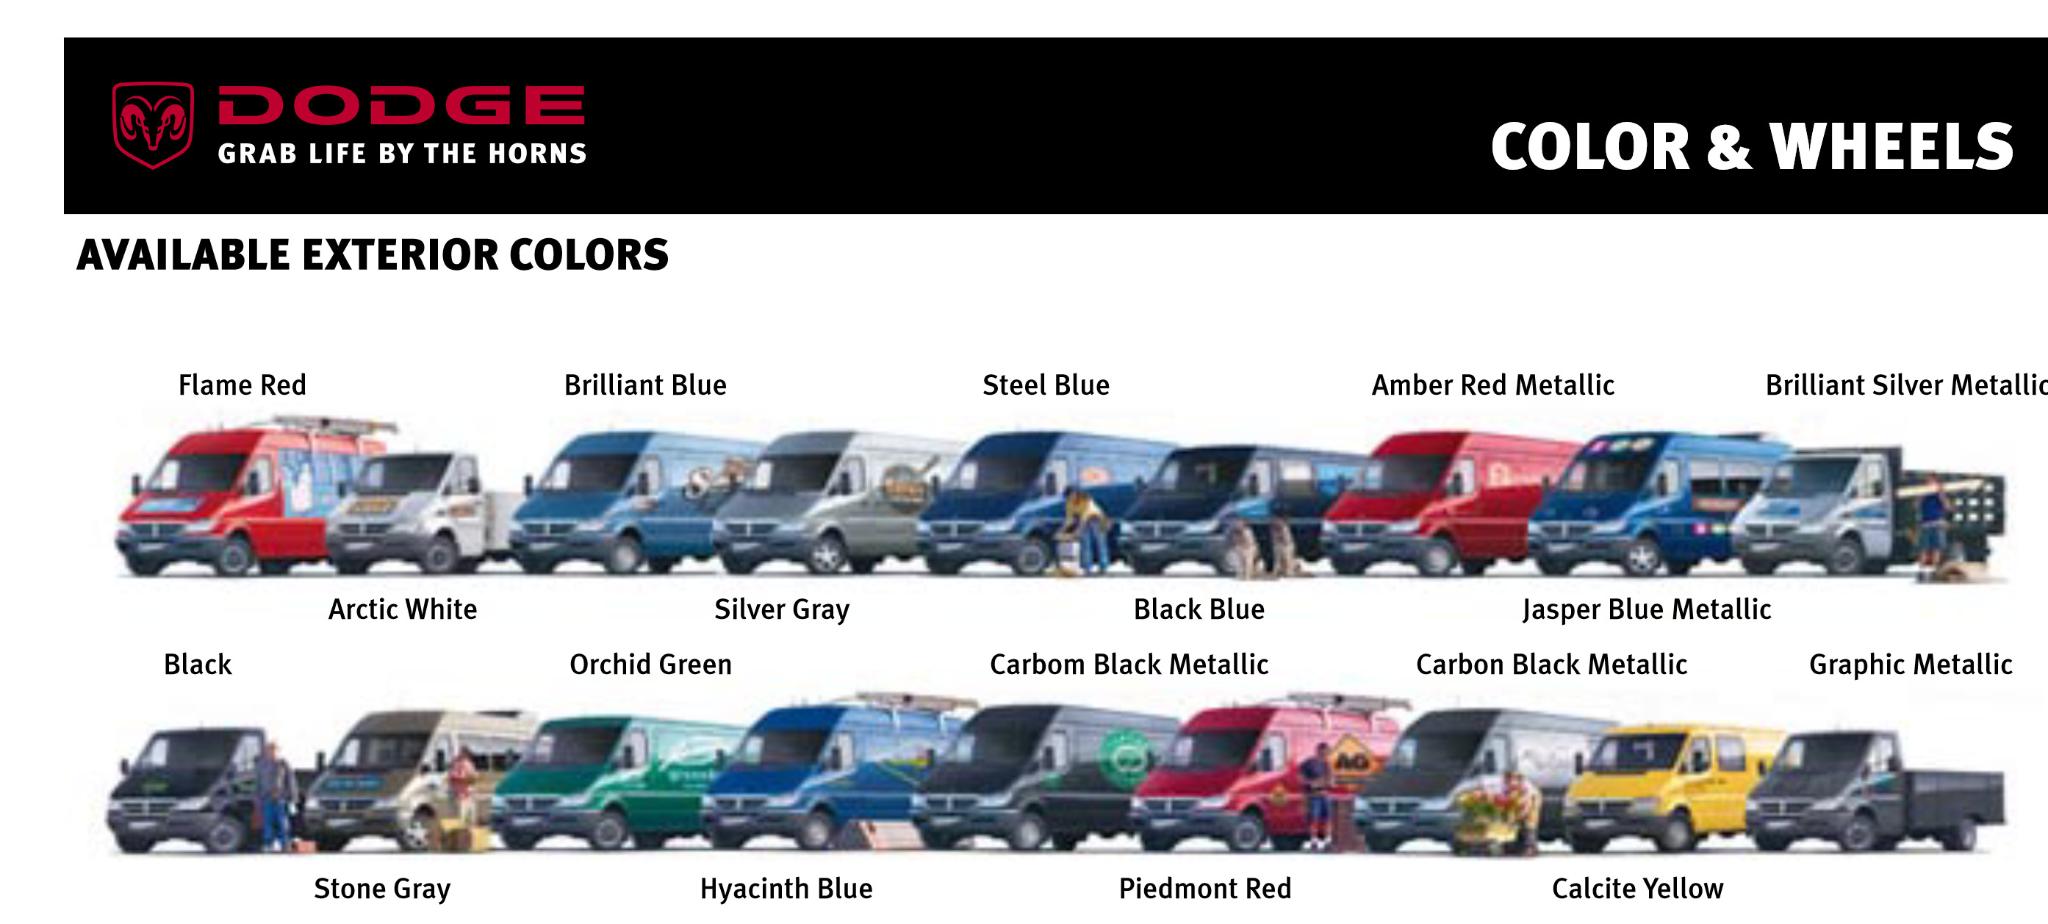 color examples for exterior colors of vehicles